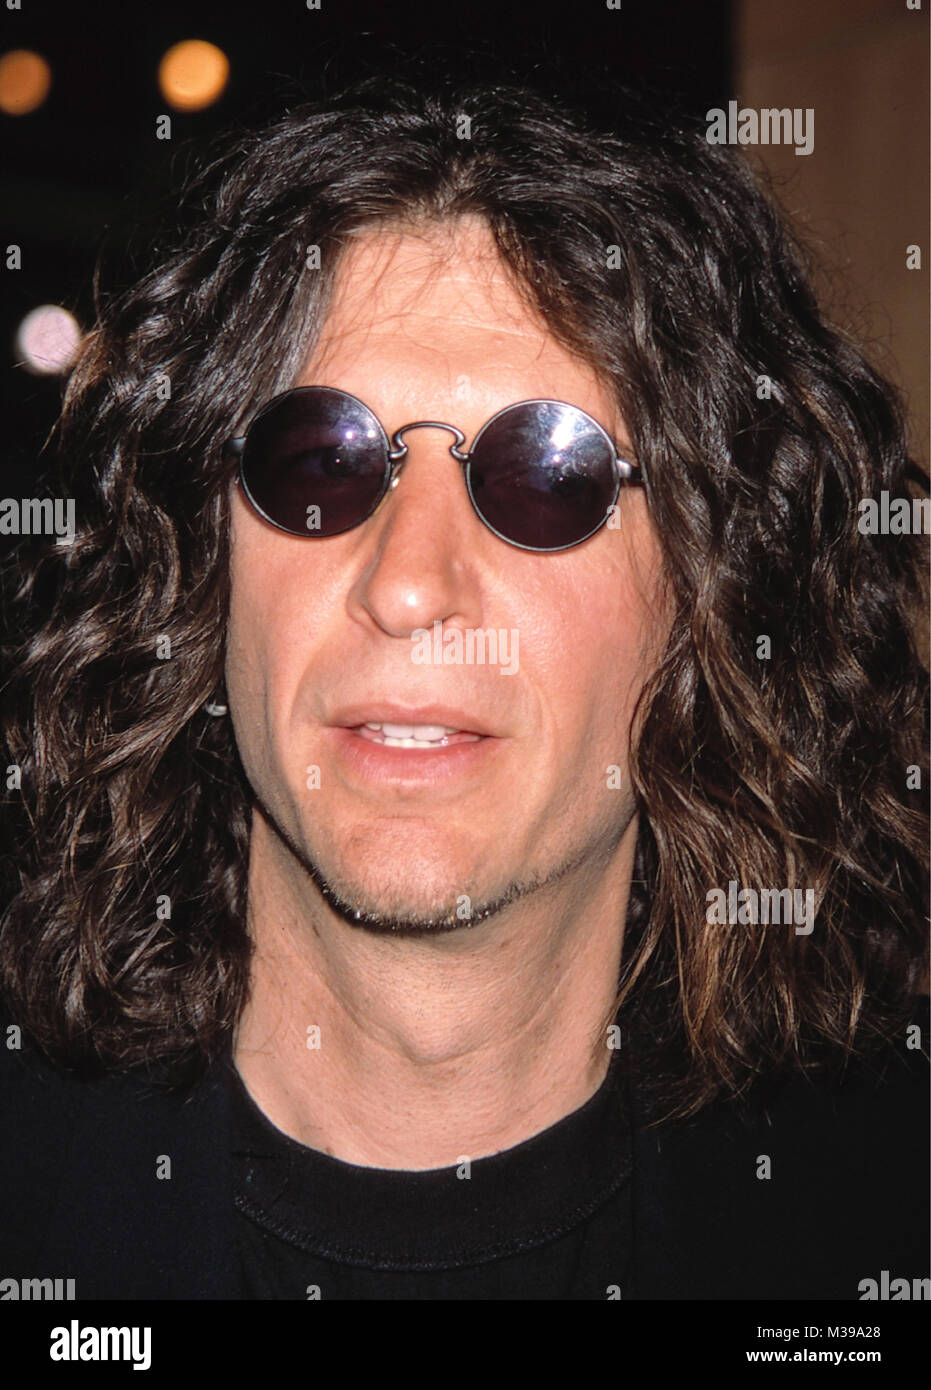 howard-stern-master-of-ceremonies-attending-the-natpe-tv-convention-M39A28.jpg